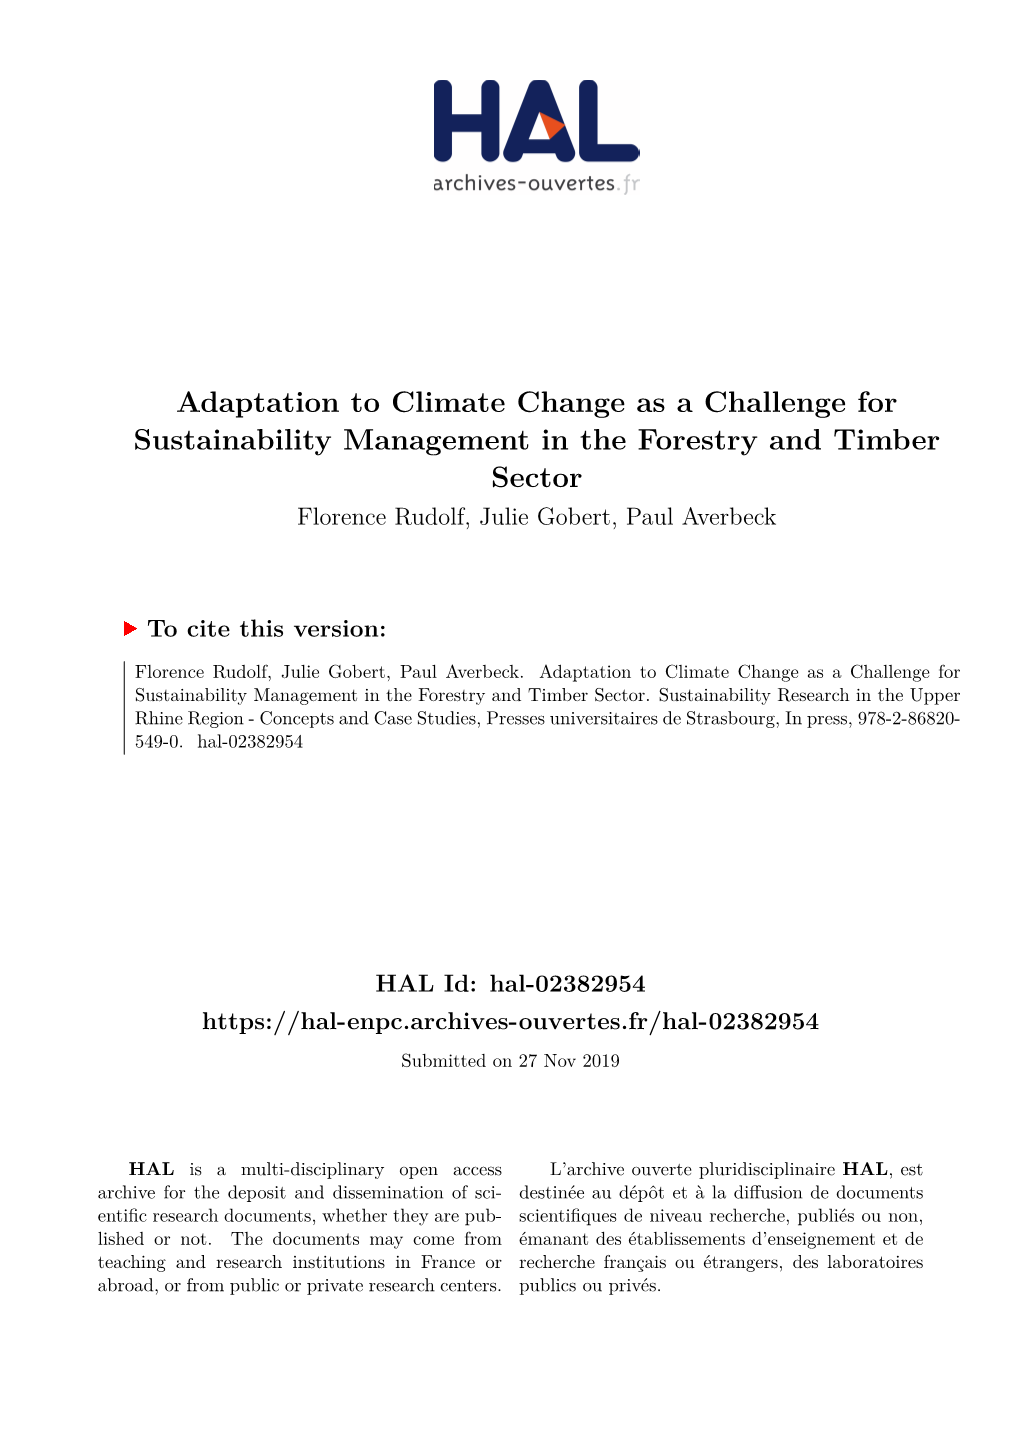 Adaptation to Climate Change As a Challenge for Sustainability Management in the Forestry and Timber Sector Florence Rudolf, Julie Gobert, Paul Averbeck